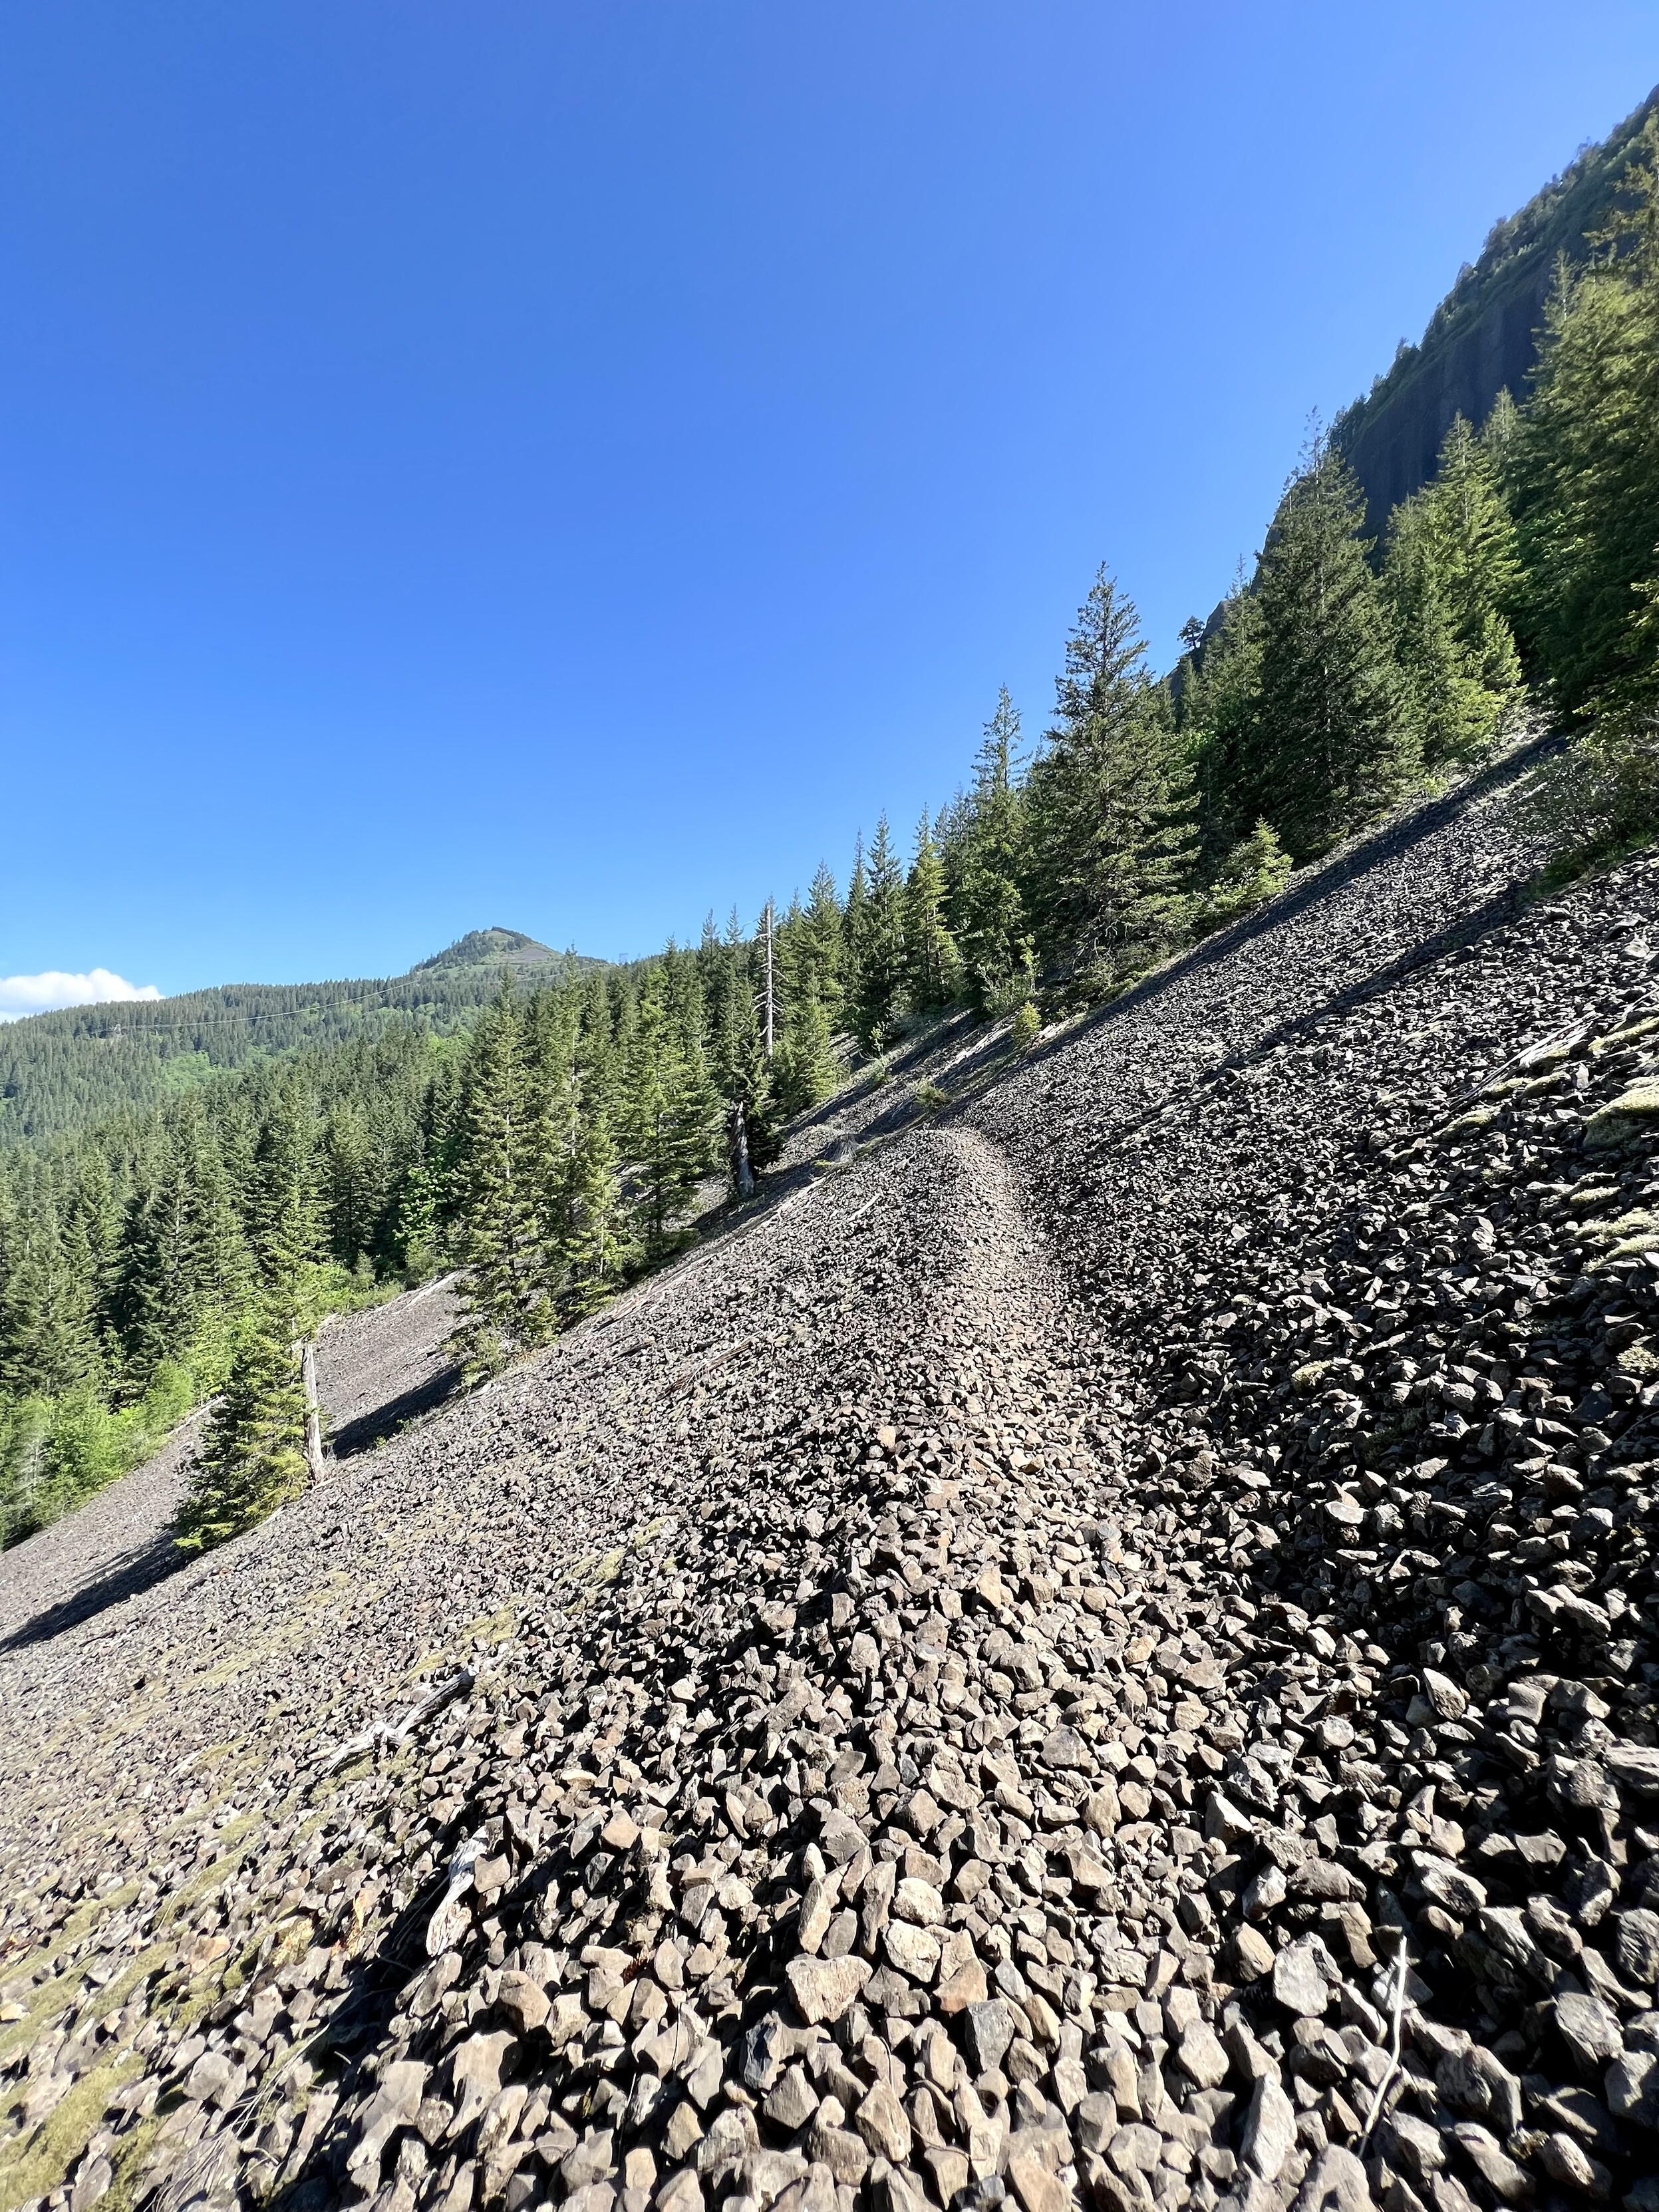 Rocky section of the Pacific Crest Trail in Washington State. The trail goes through a rocky slope with green trees and a small mountain in the distance.